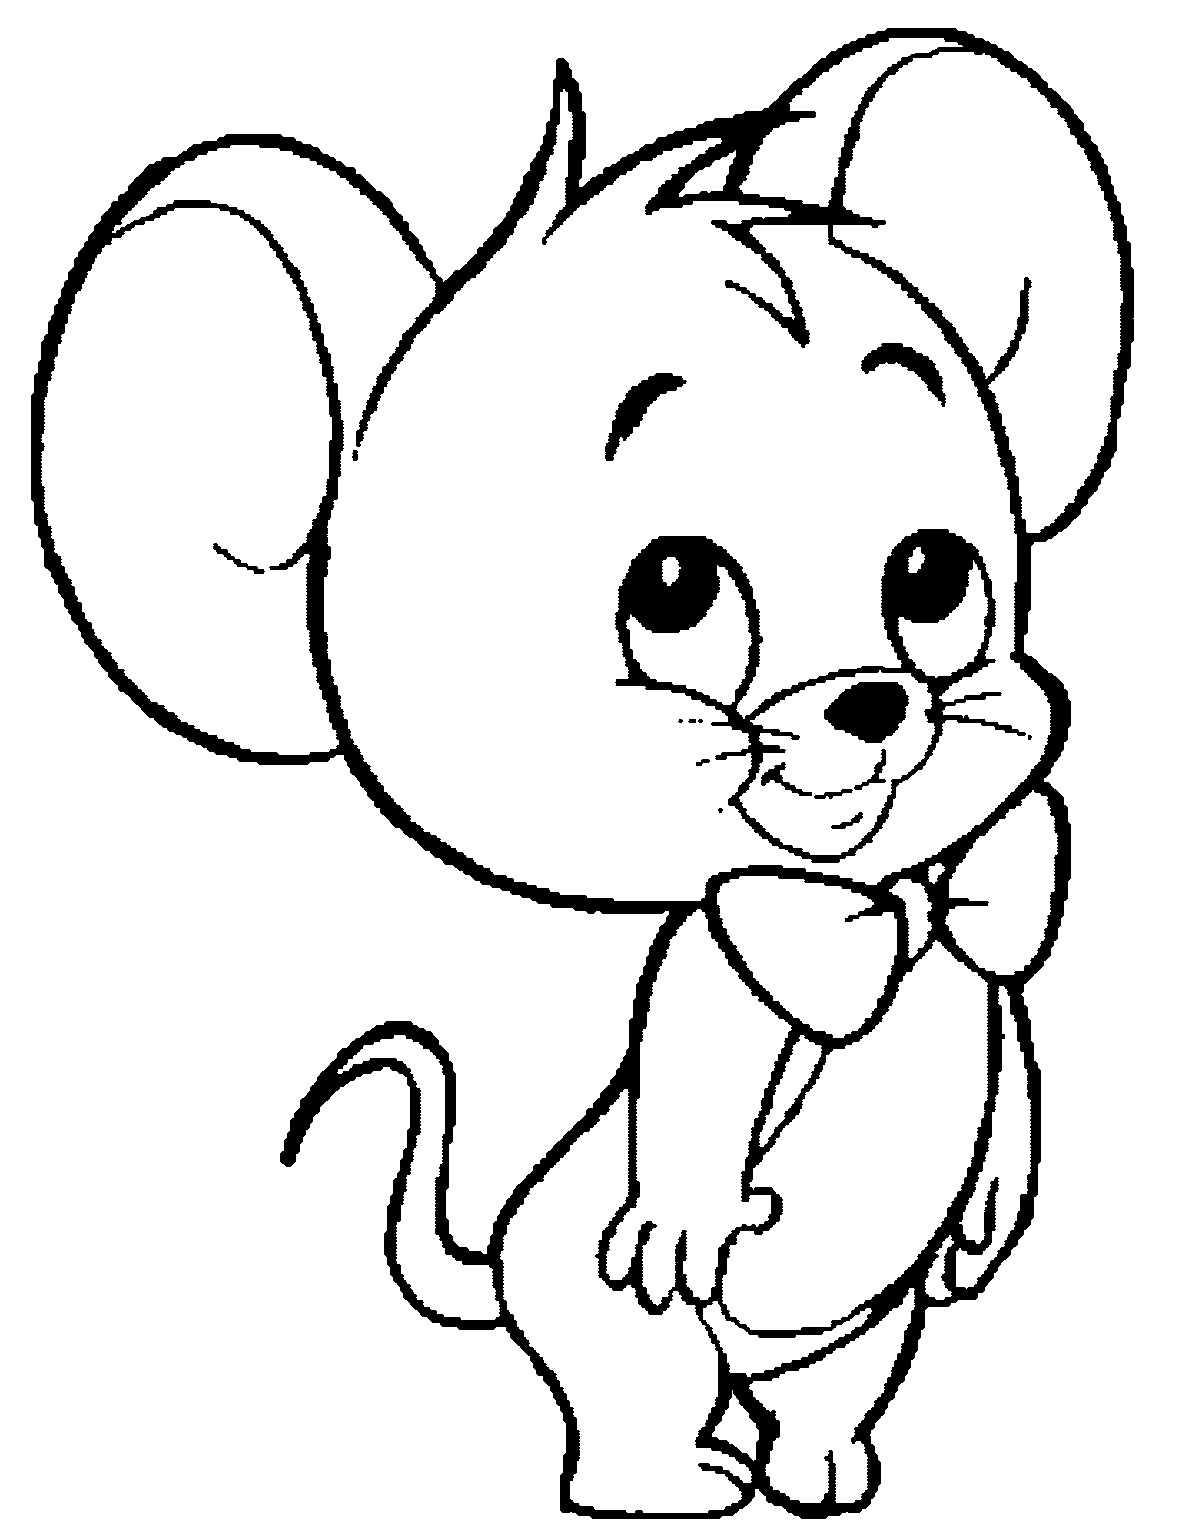 Mice Coloring Page - Coloring Home